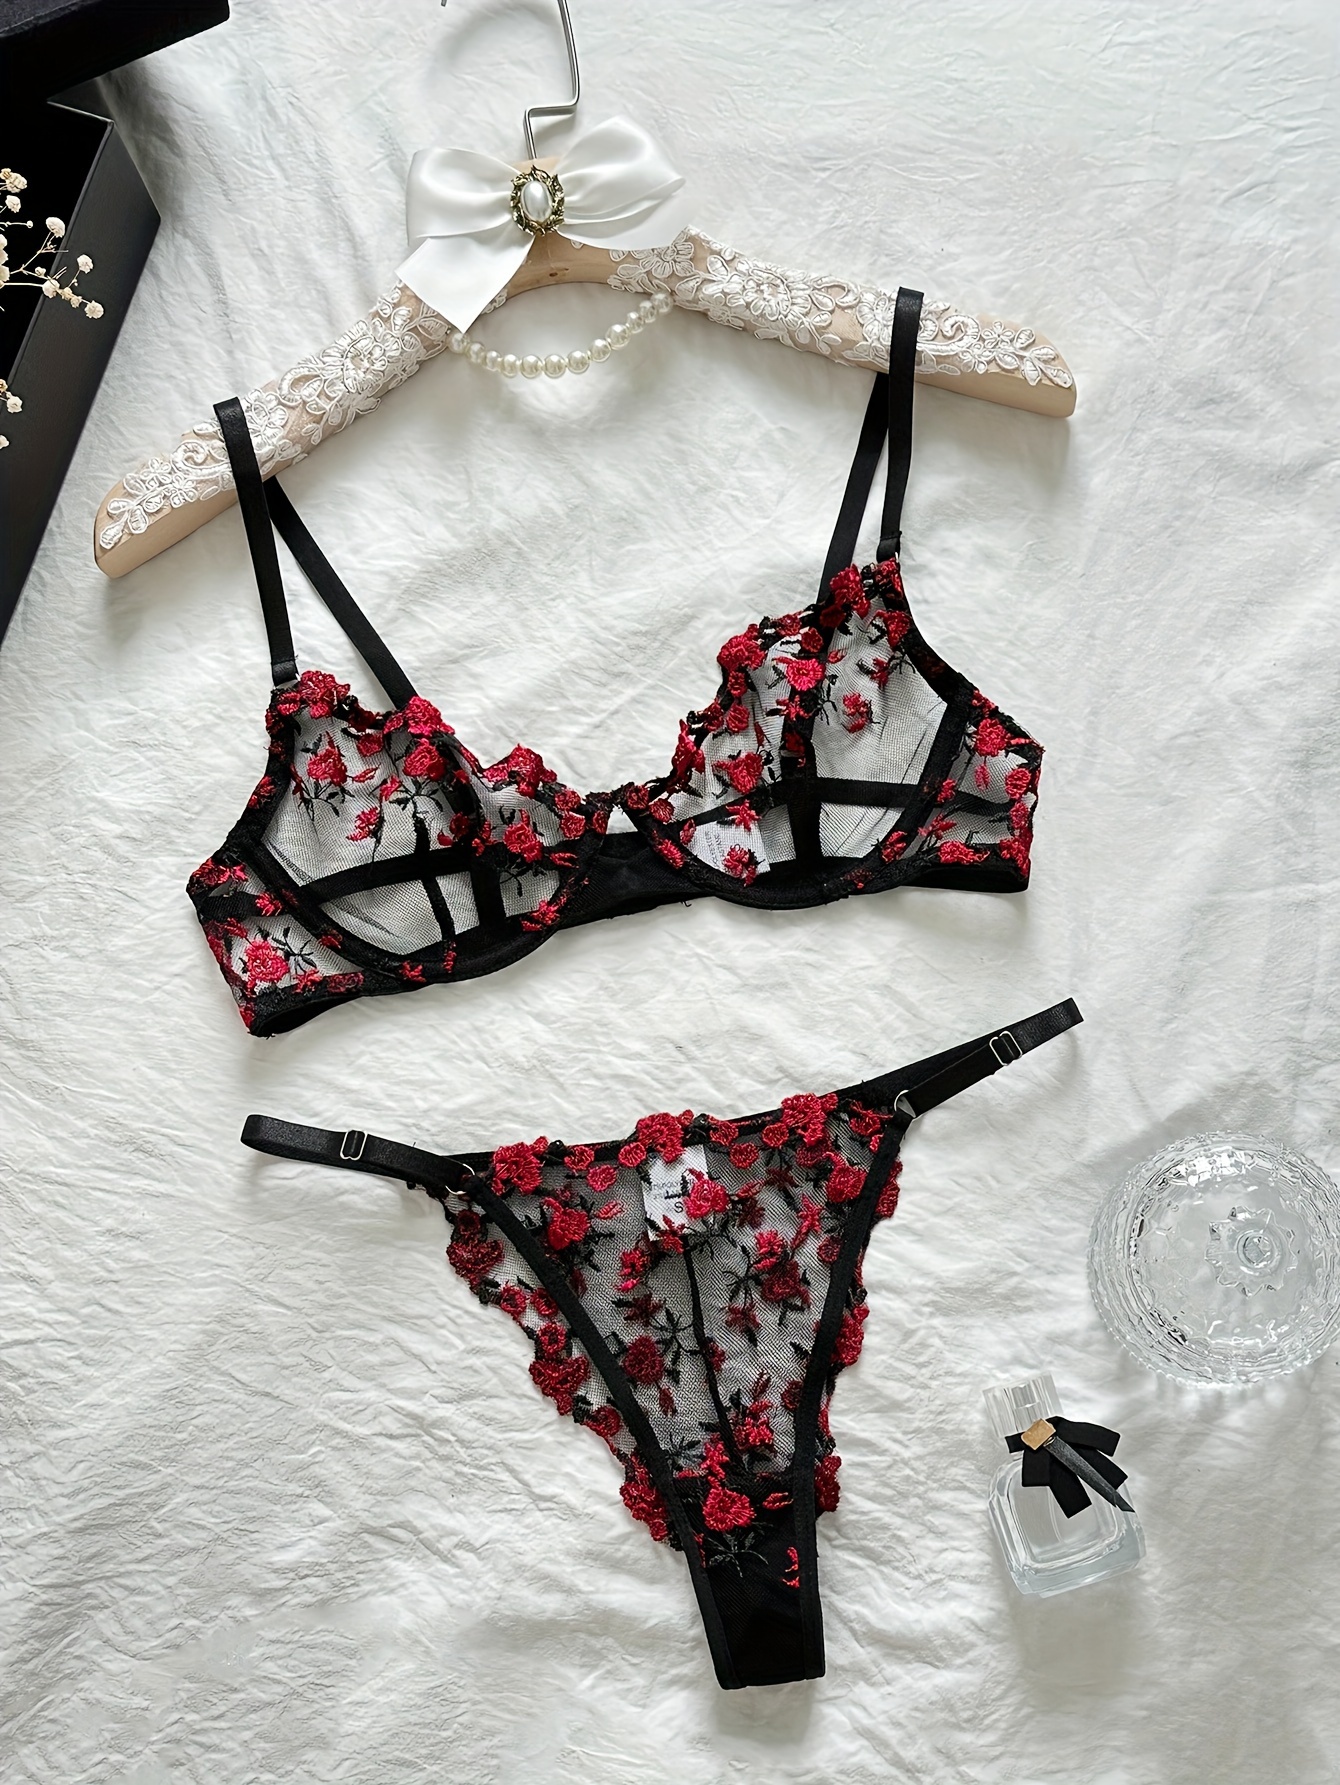 Heart Embroidery Lingerie Set Mesh Unlined Bra Strappy Thong